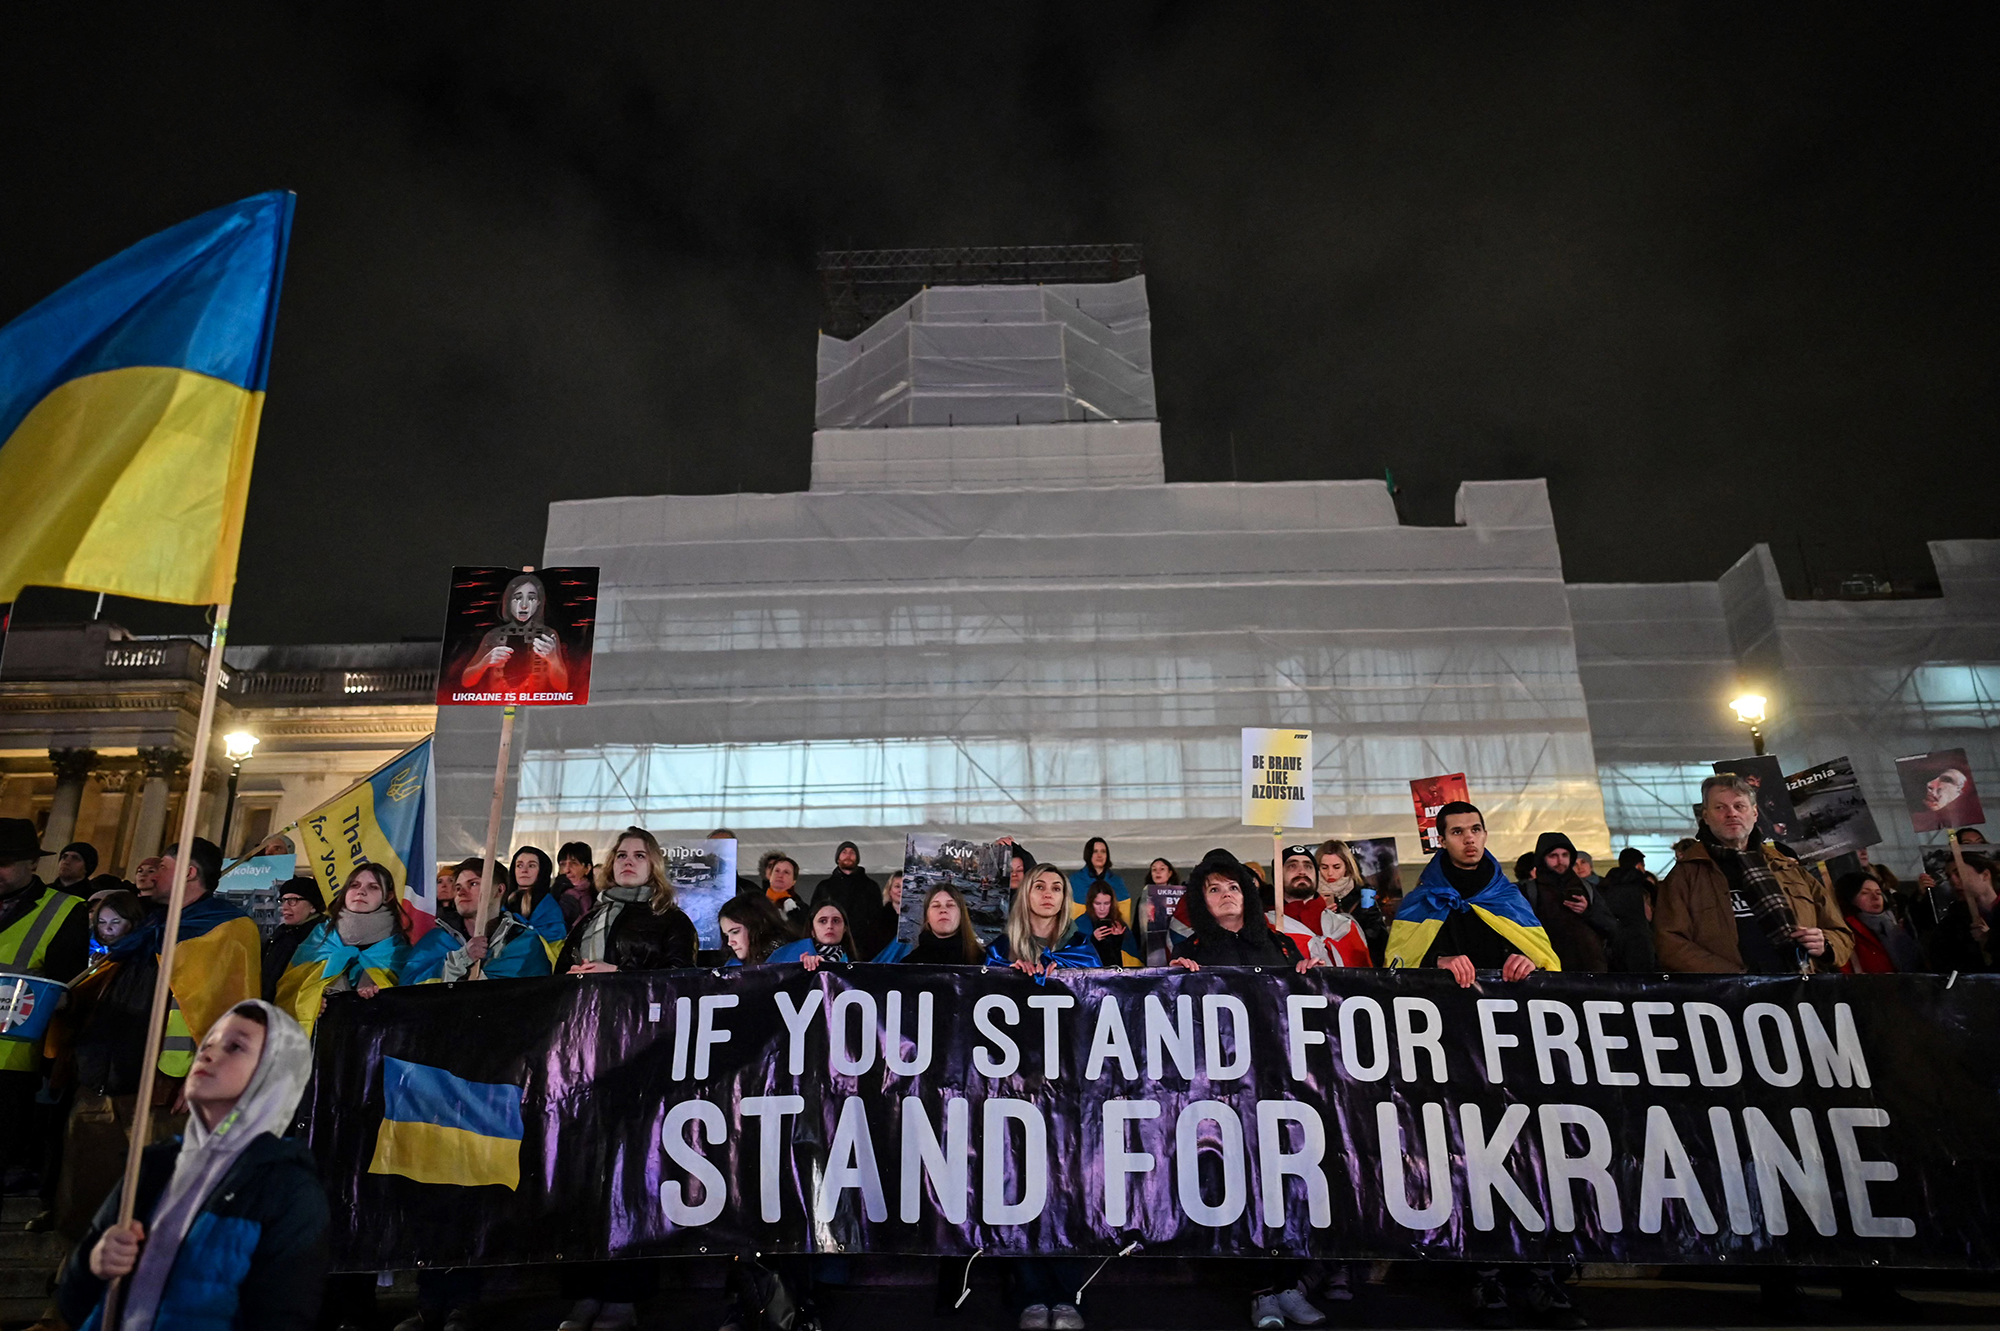 People wave Ukrainian flags and hold a banner as they attend a vigil in Trafalgar Square on February 23 to mark one year anniversary of Russias invasion of Ukraine.